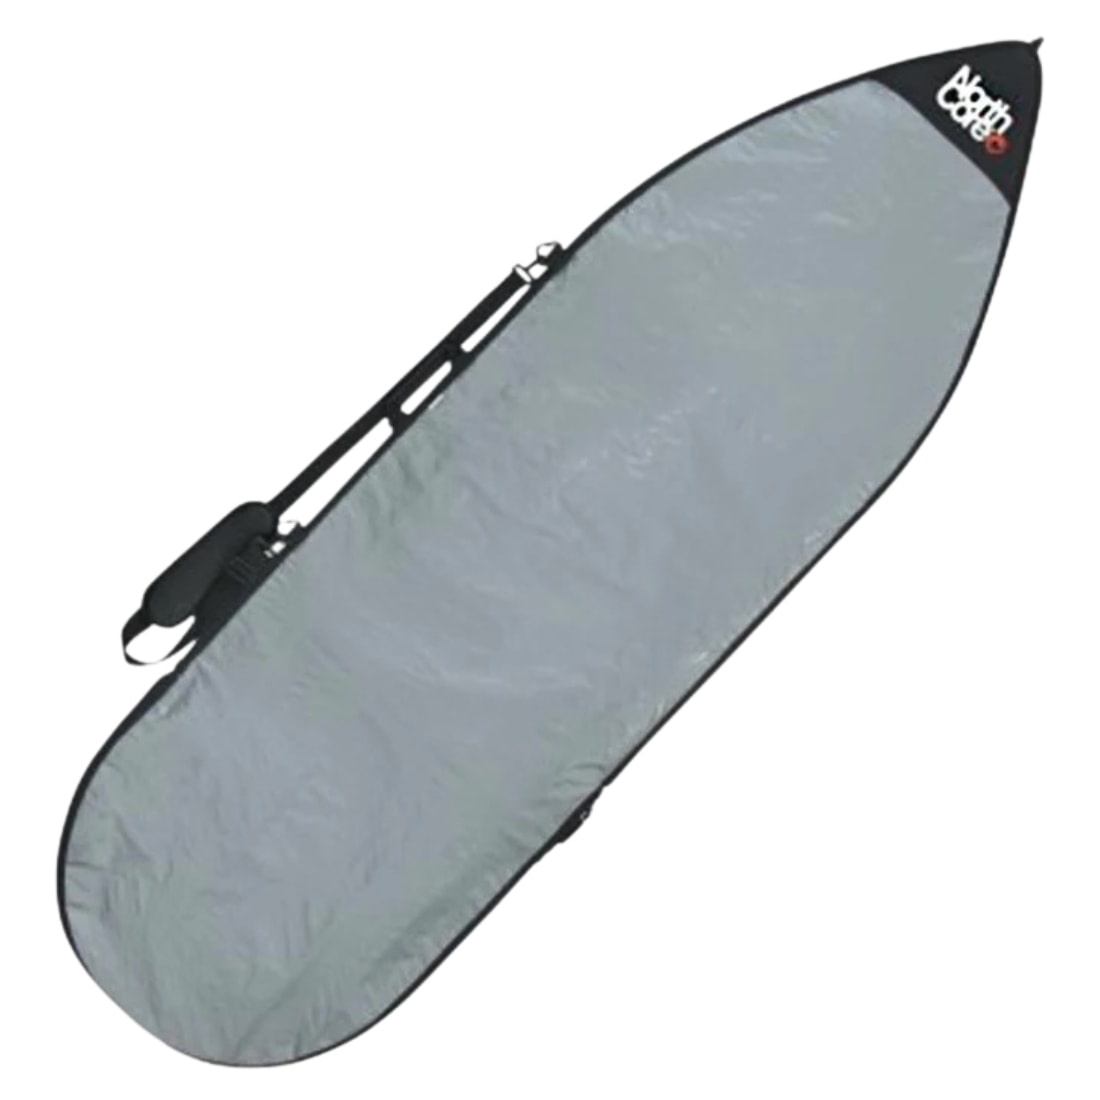 Northcore 6'4 Addiction Shortboard/Fish Surfboard Bag - Silver - Surfboard Day Runner Bag/Cover by Northcore 6ft 4